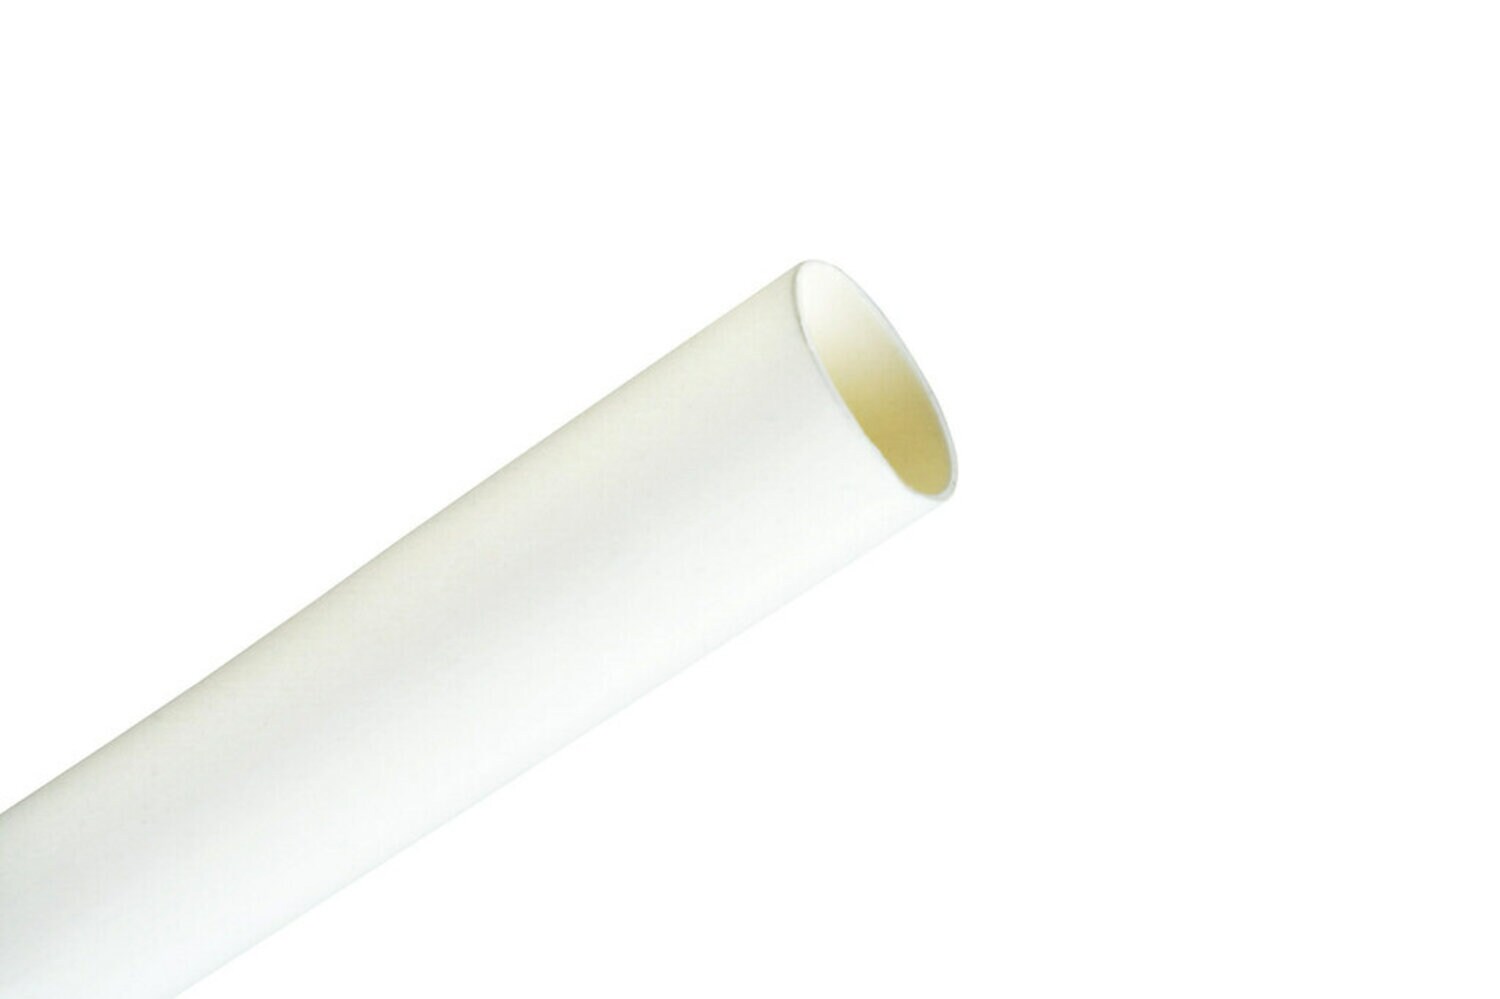 7010351714 - 3M Heat Shrink Thin-Wall Tubing FP-301-3/64-48"-White-250 Pcs, 48 in
Length sticks, 250 pieces/case